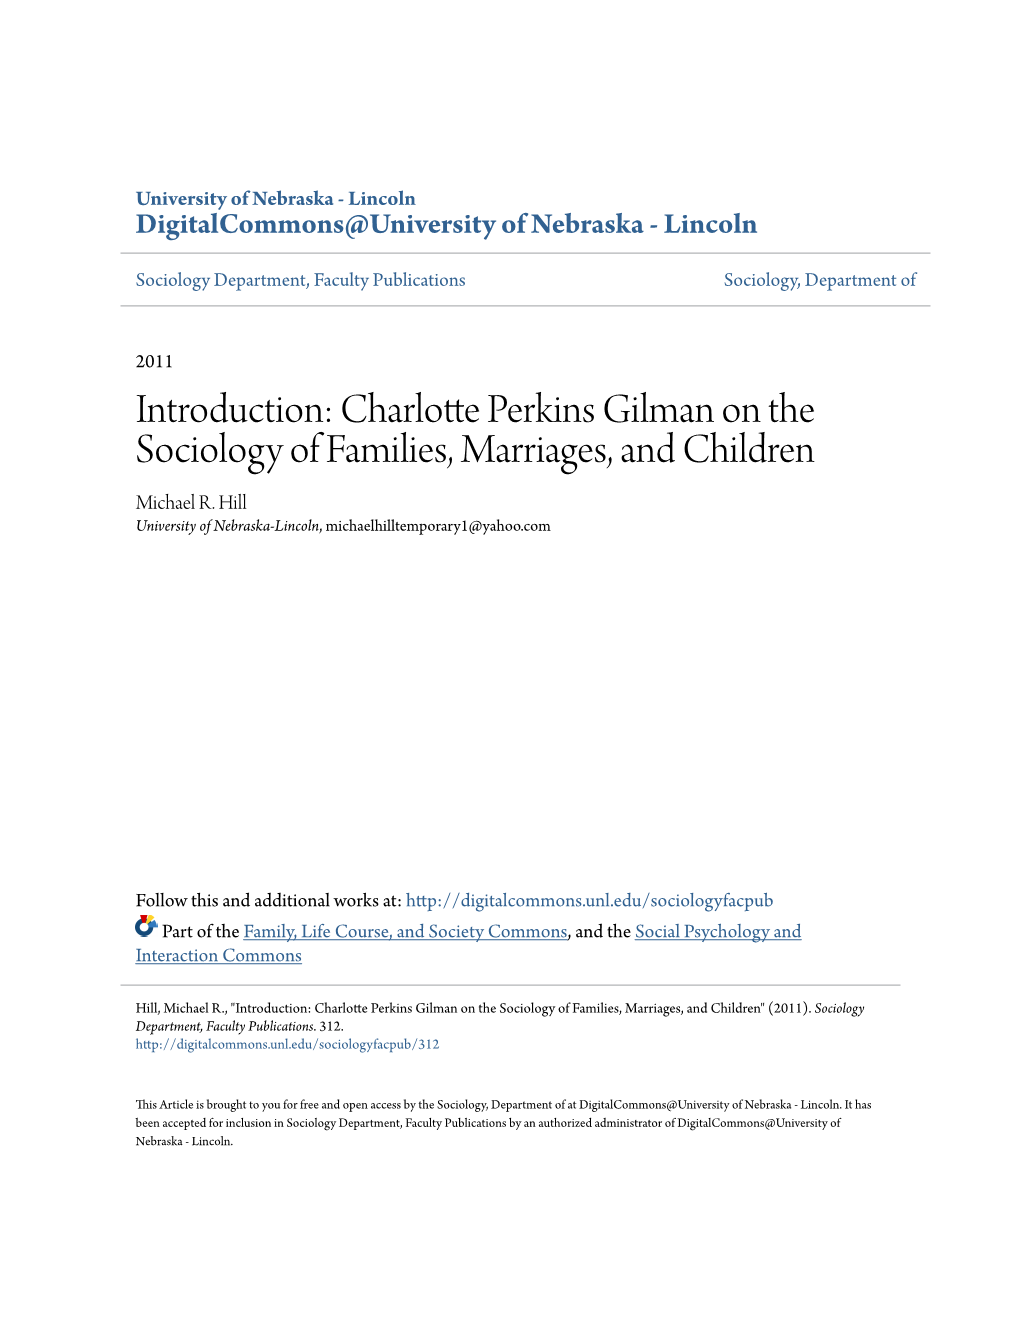 Charlotte Perkins Gilman on the Sociology of Families, Marriages, and Children Michael R